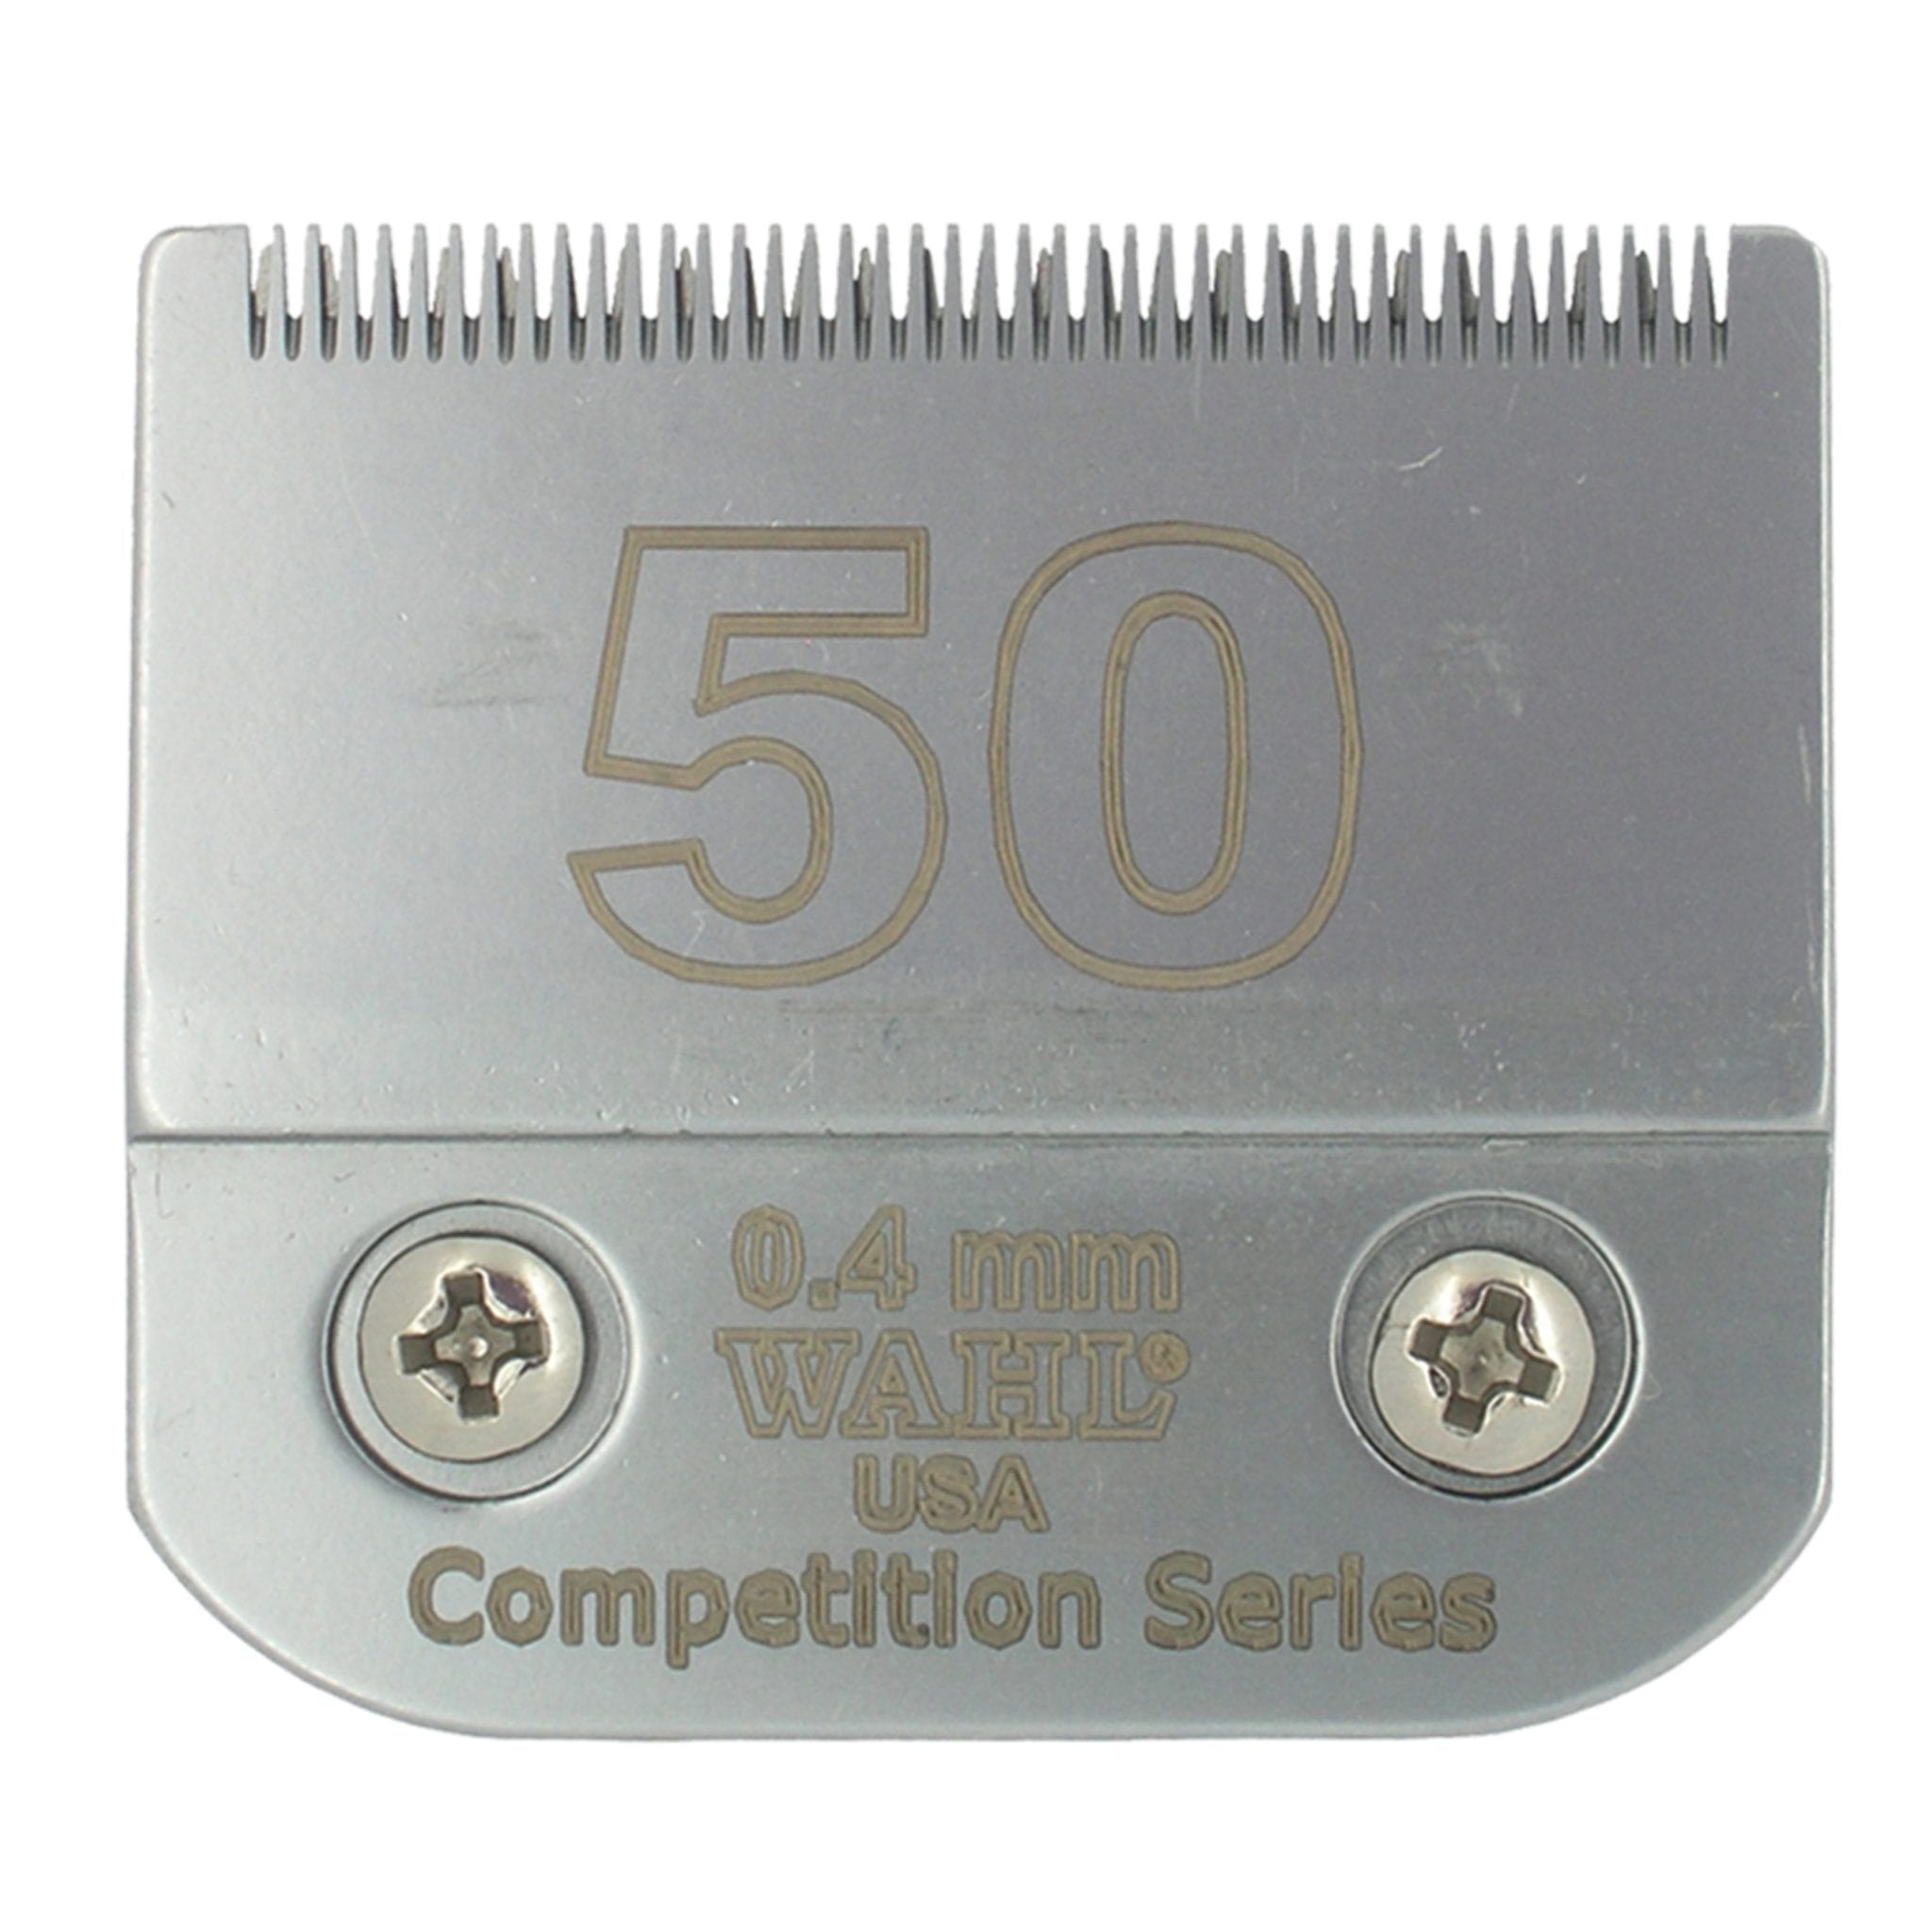 Wahl Competition Series blades